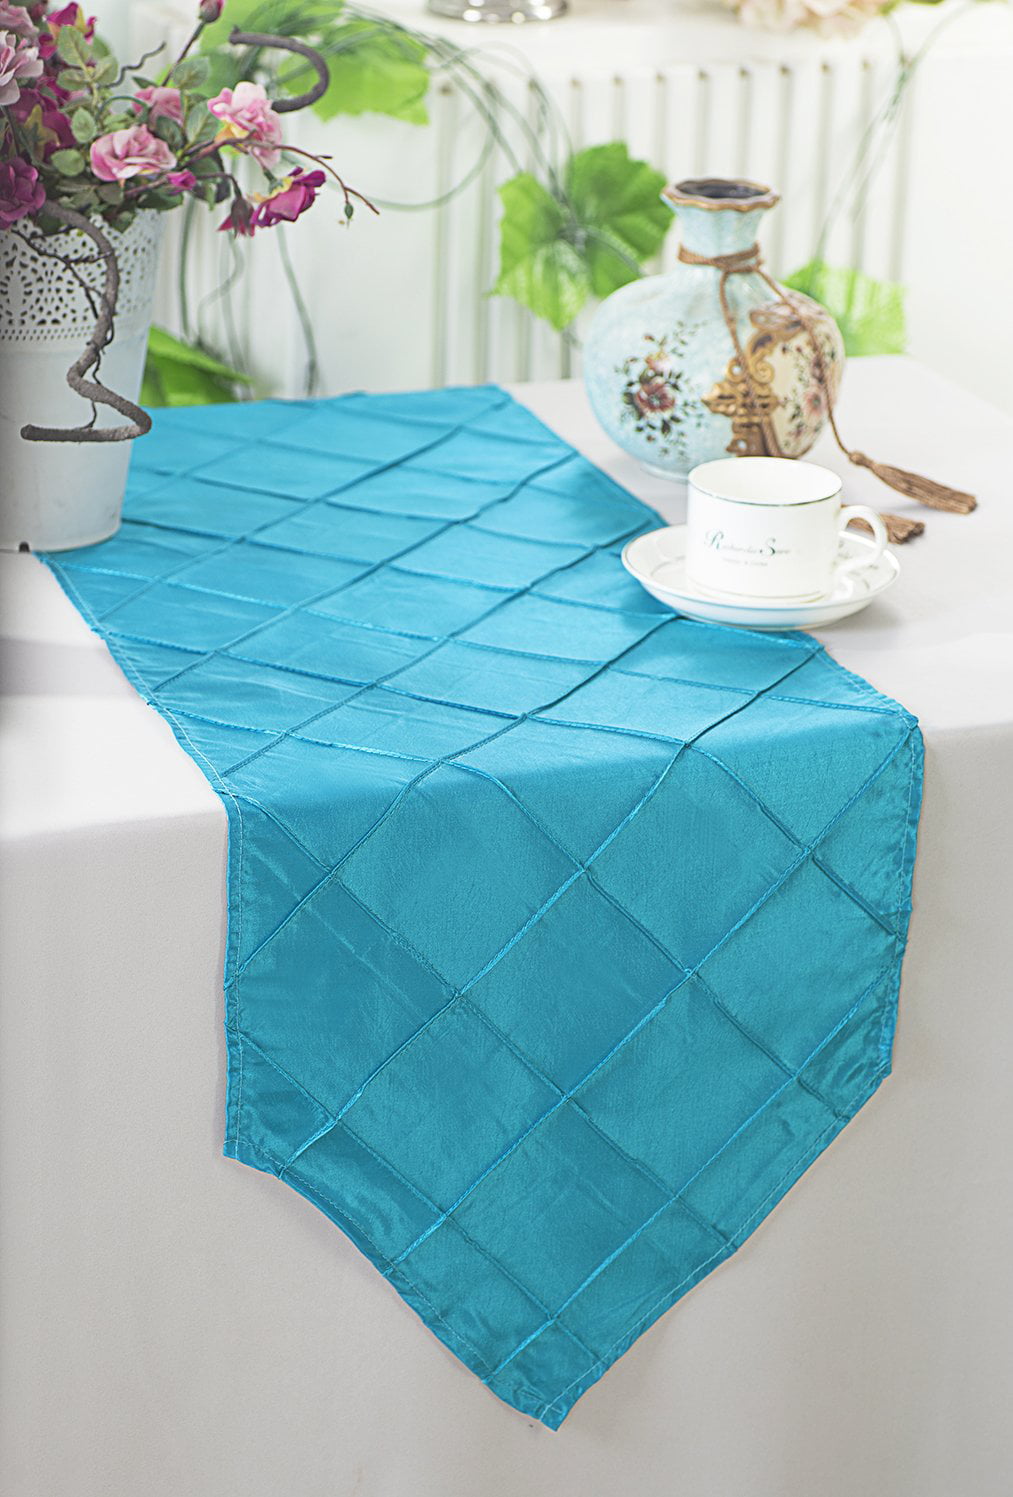 Turquoise SATIN 12x108" Table RUNNER Wedding Party Catering Dinner Decorations 